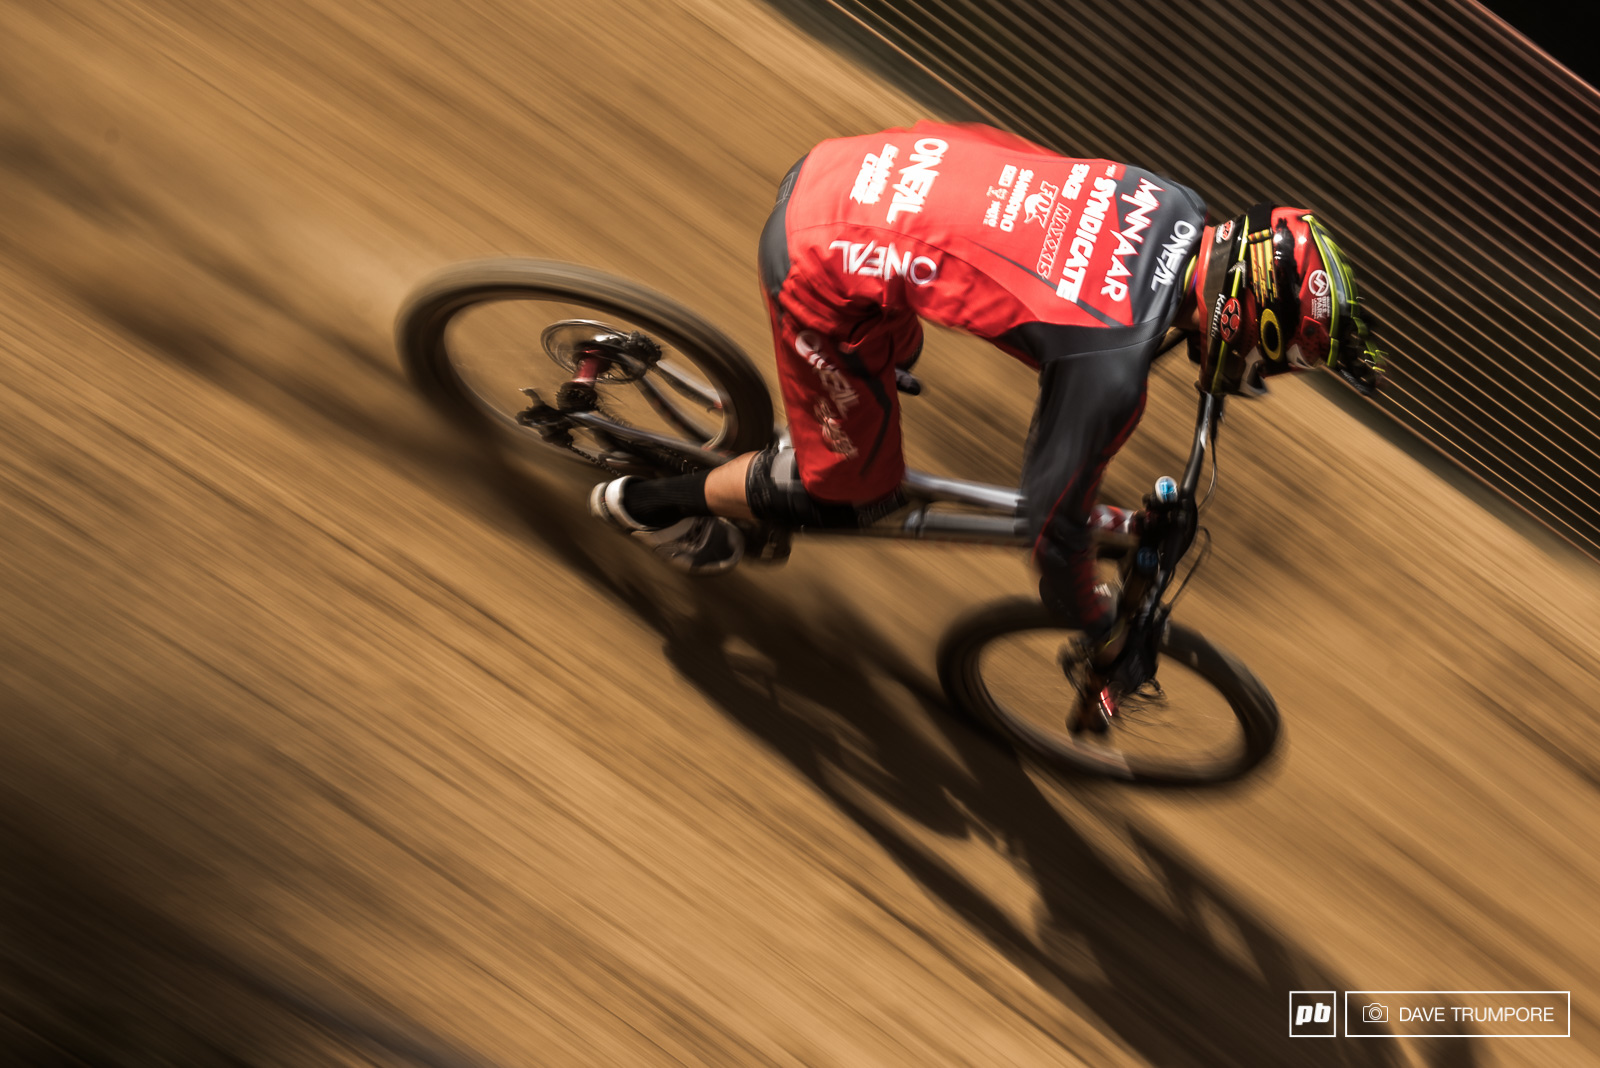 Greg Minnaar would finish the day 10th but we know never to count him out.